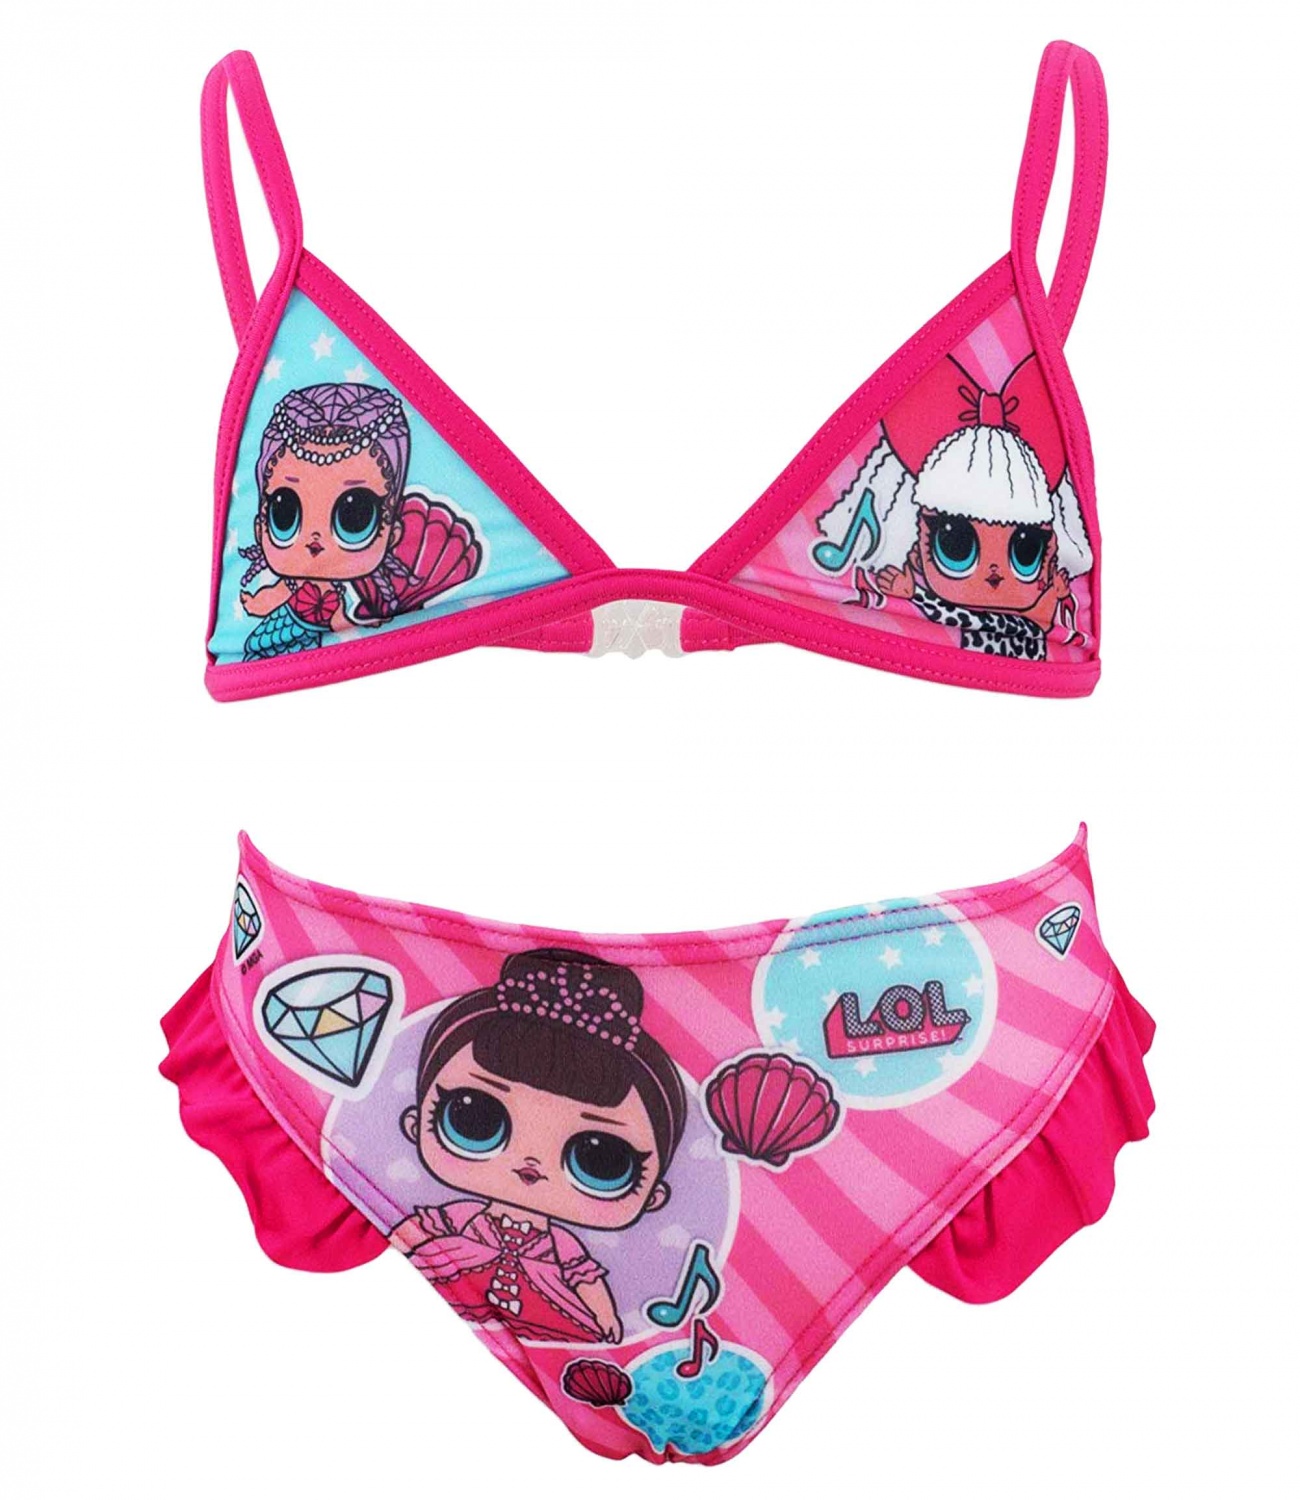 L.O.L. Surprise® Costum  baie 2 piese ciclam 23562